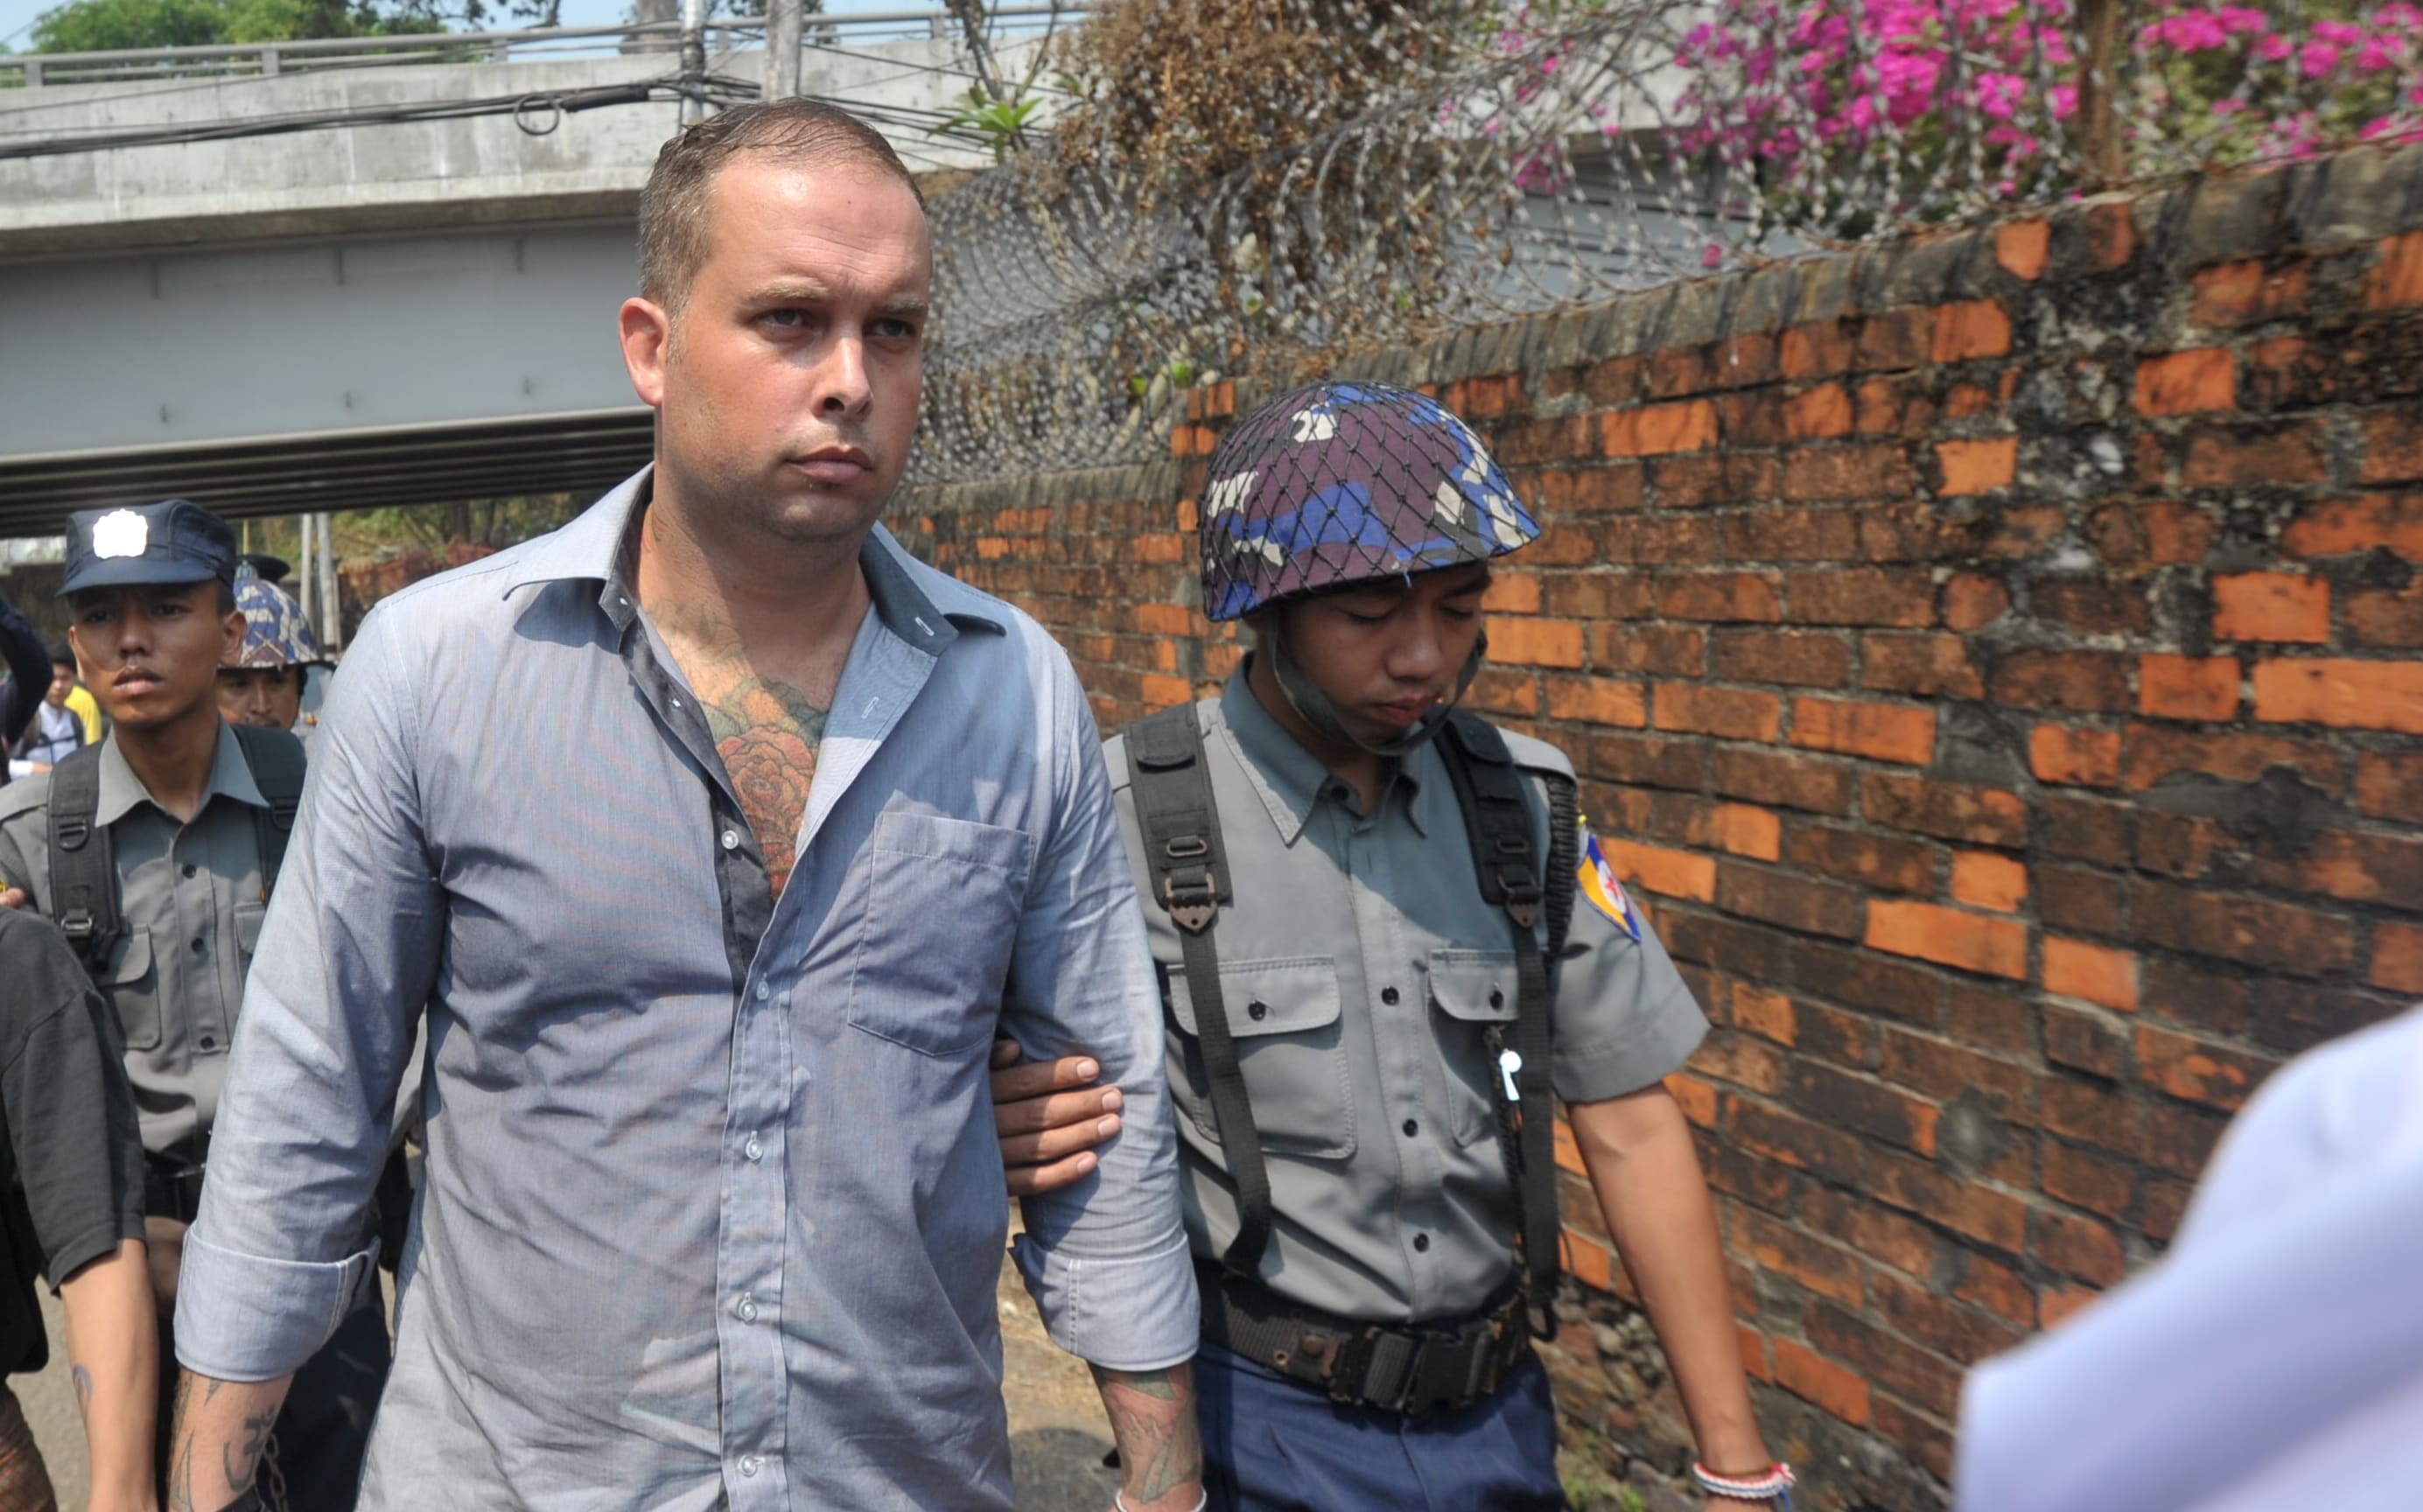 New Zealand bar manager Philip Blackwood, centre, is escorted by police as he arrives at a court for a hearing in Yangon on 17 March 2015.